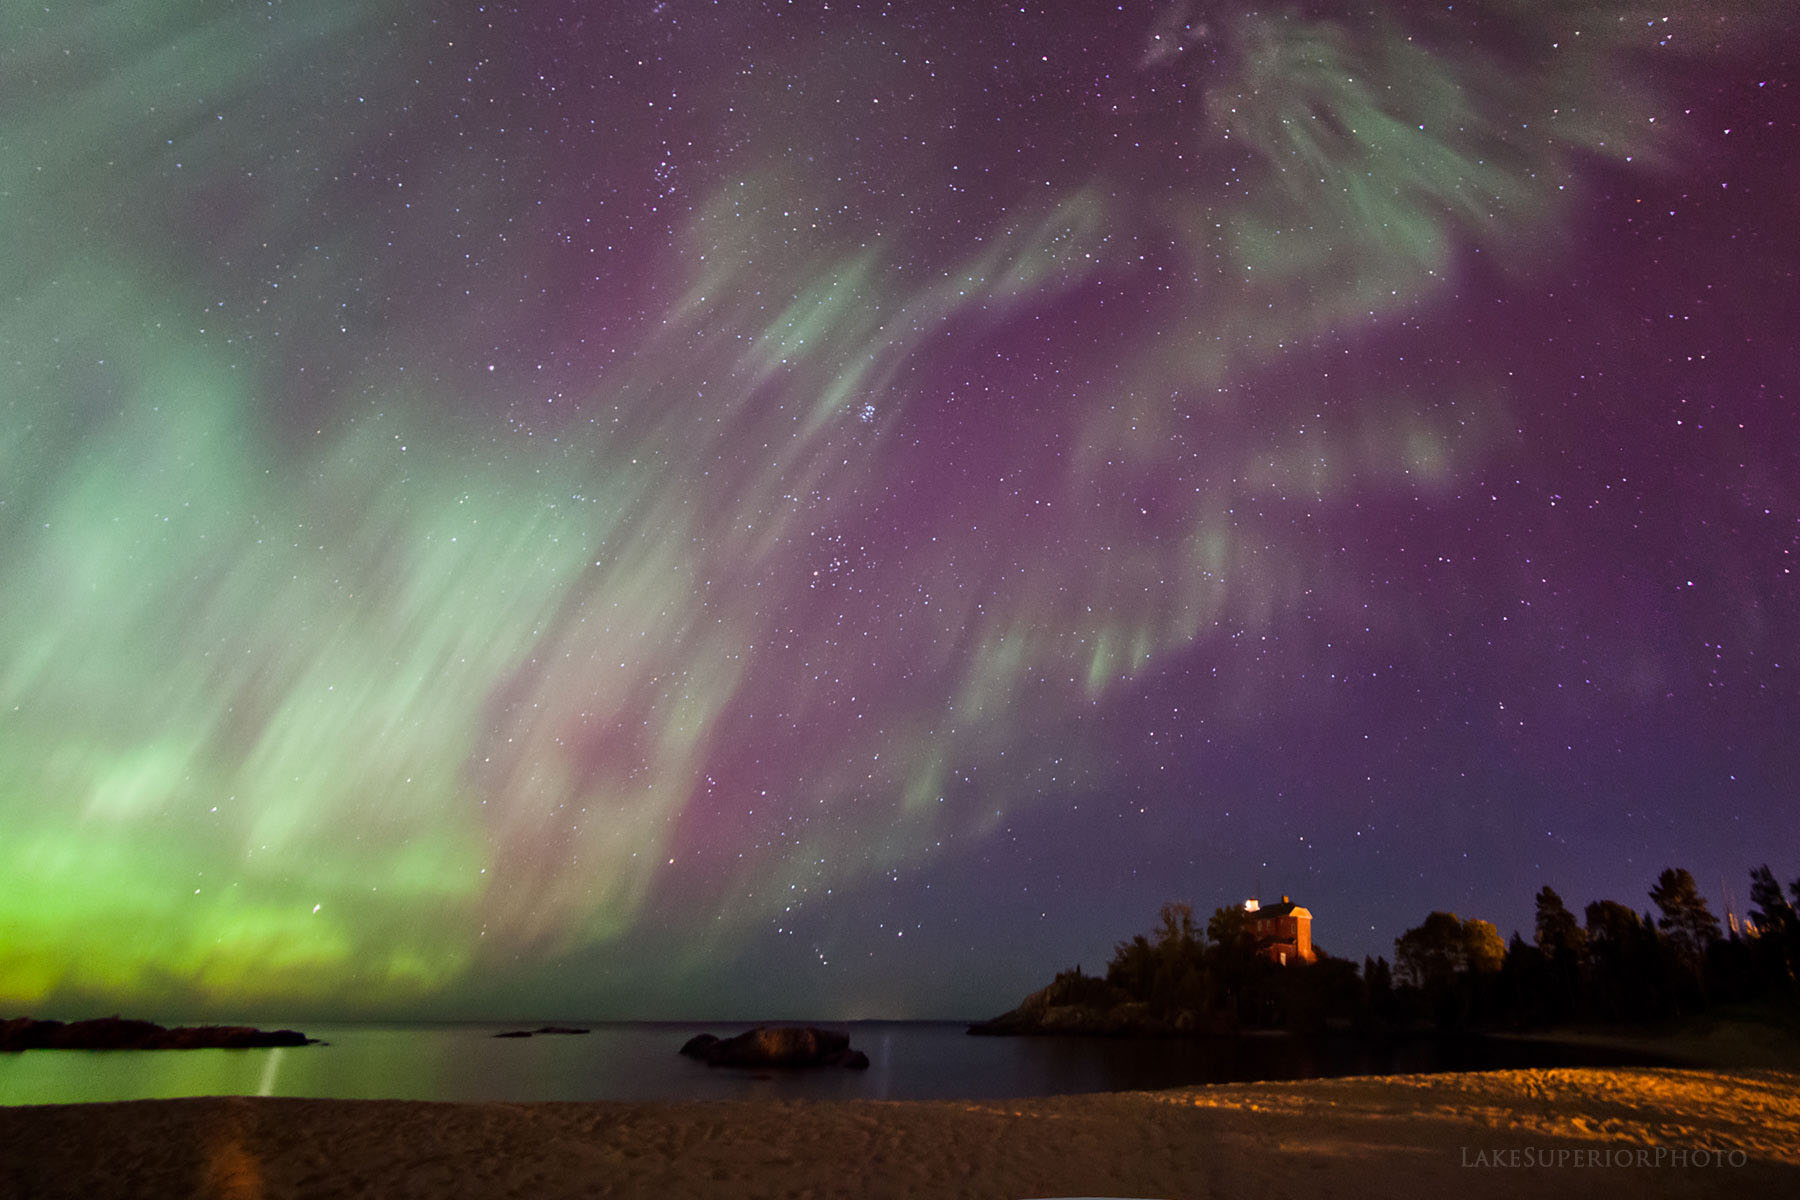 Her photos of the Northern Lights have found national acclaim.